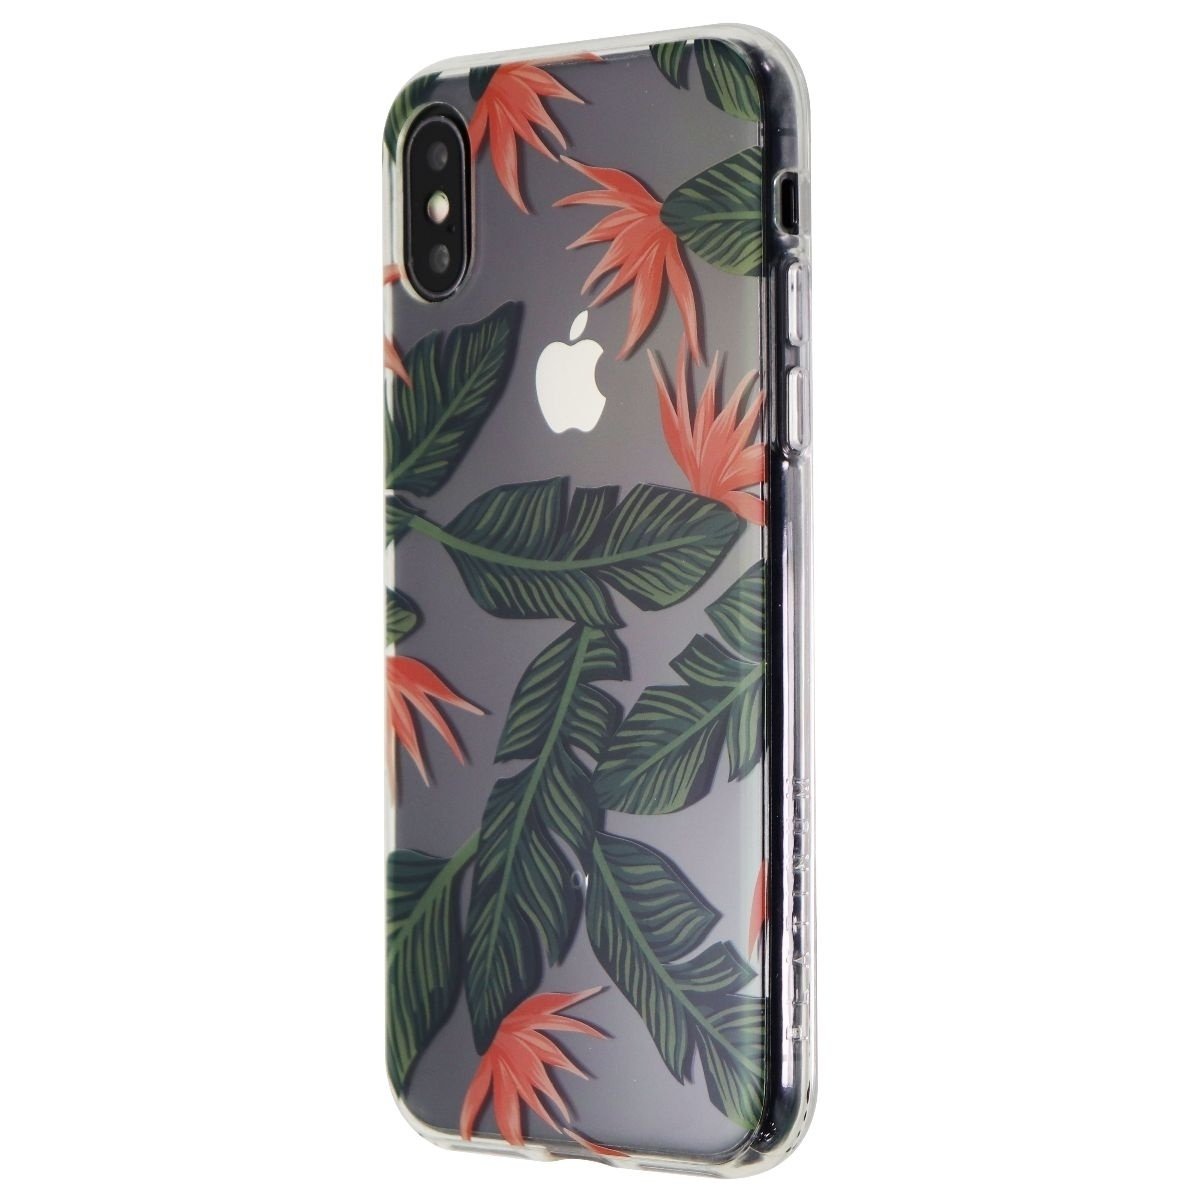 Platinum Hardshell Case For Apple IPhone X And XS Smartphones - Palm Trees/Clear